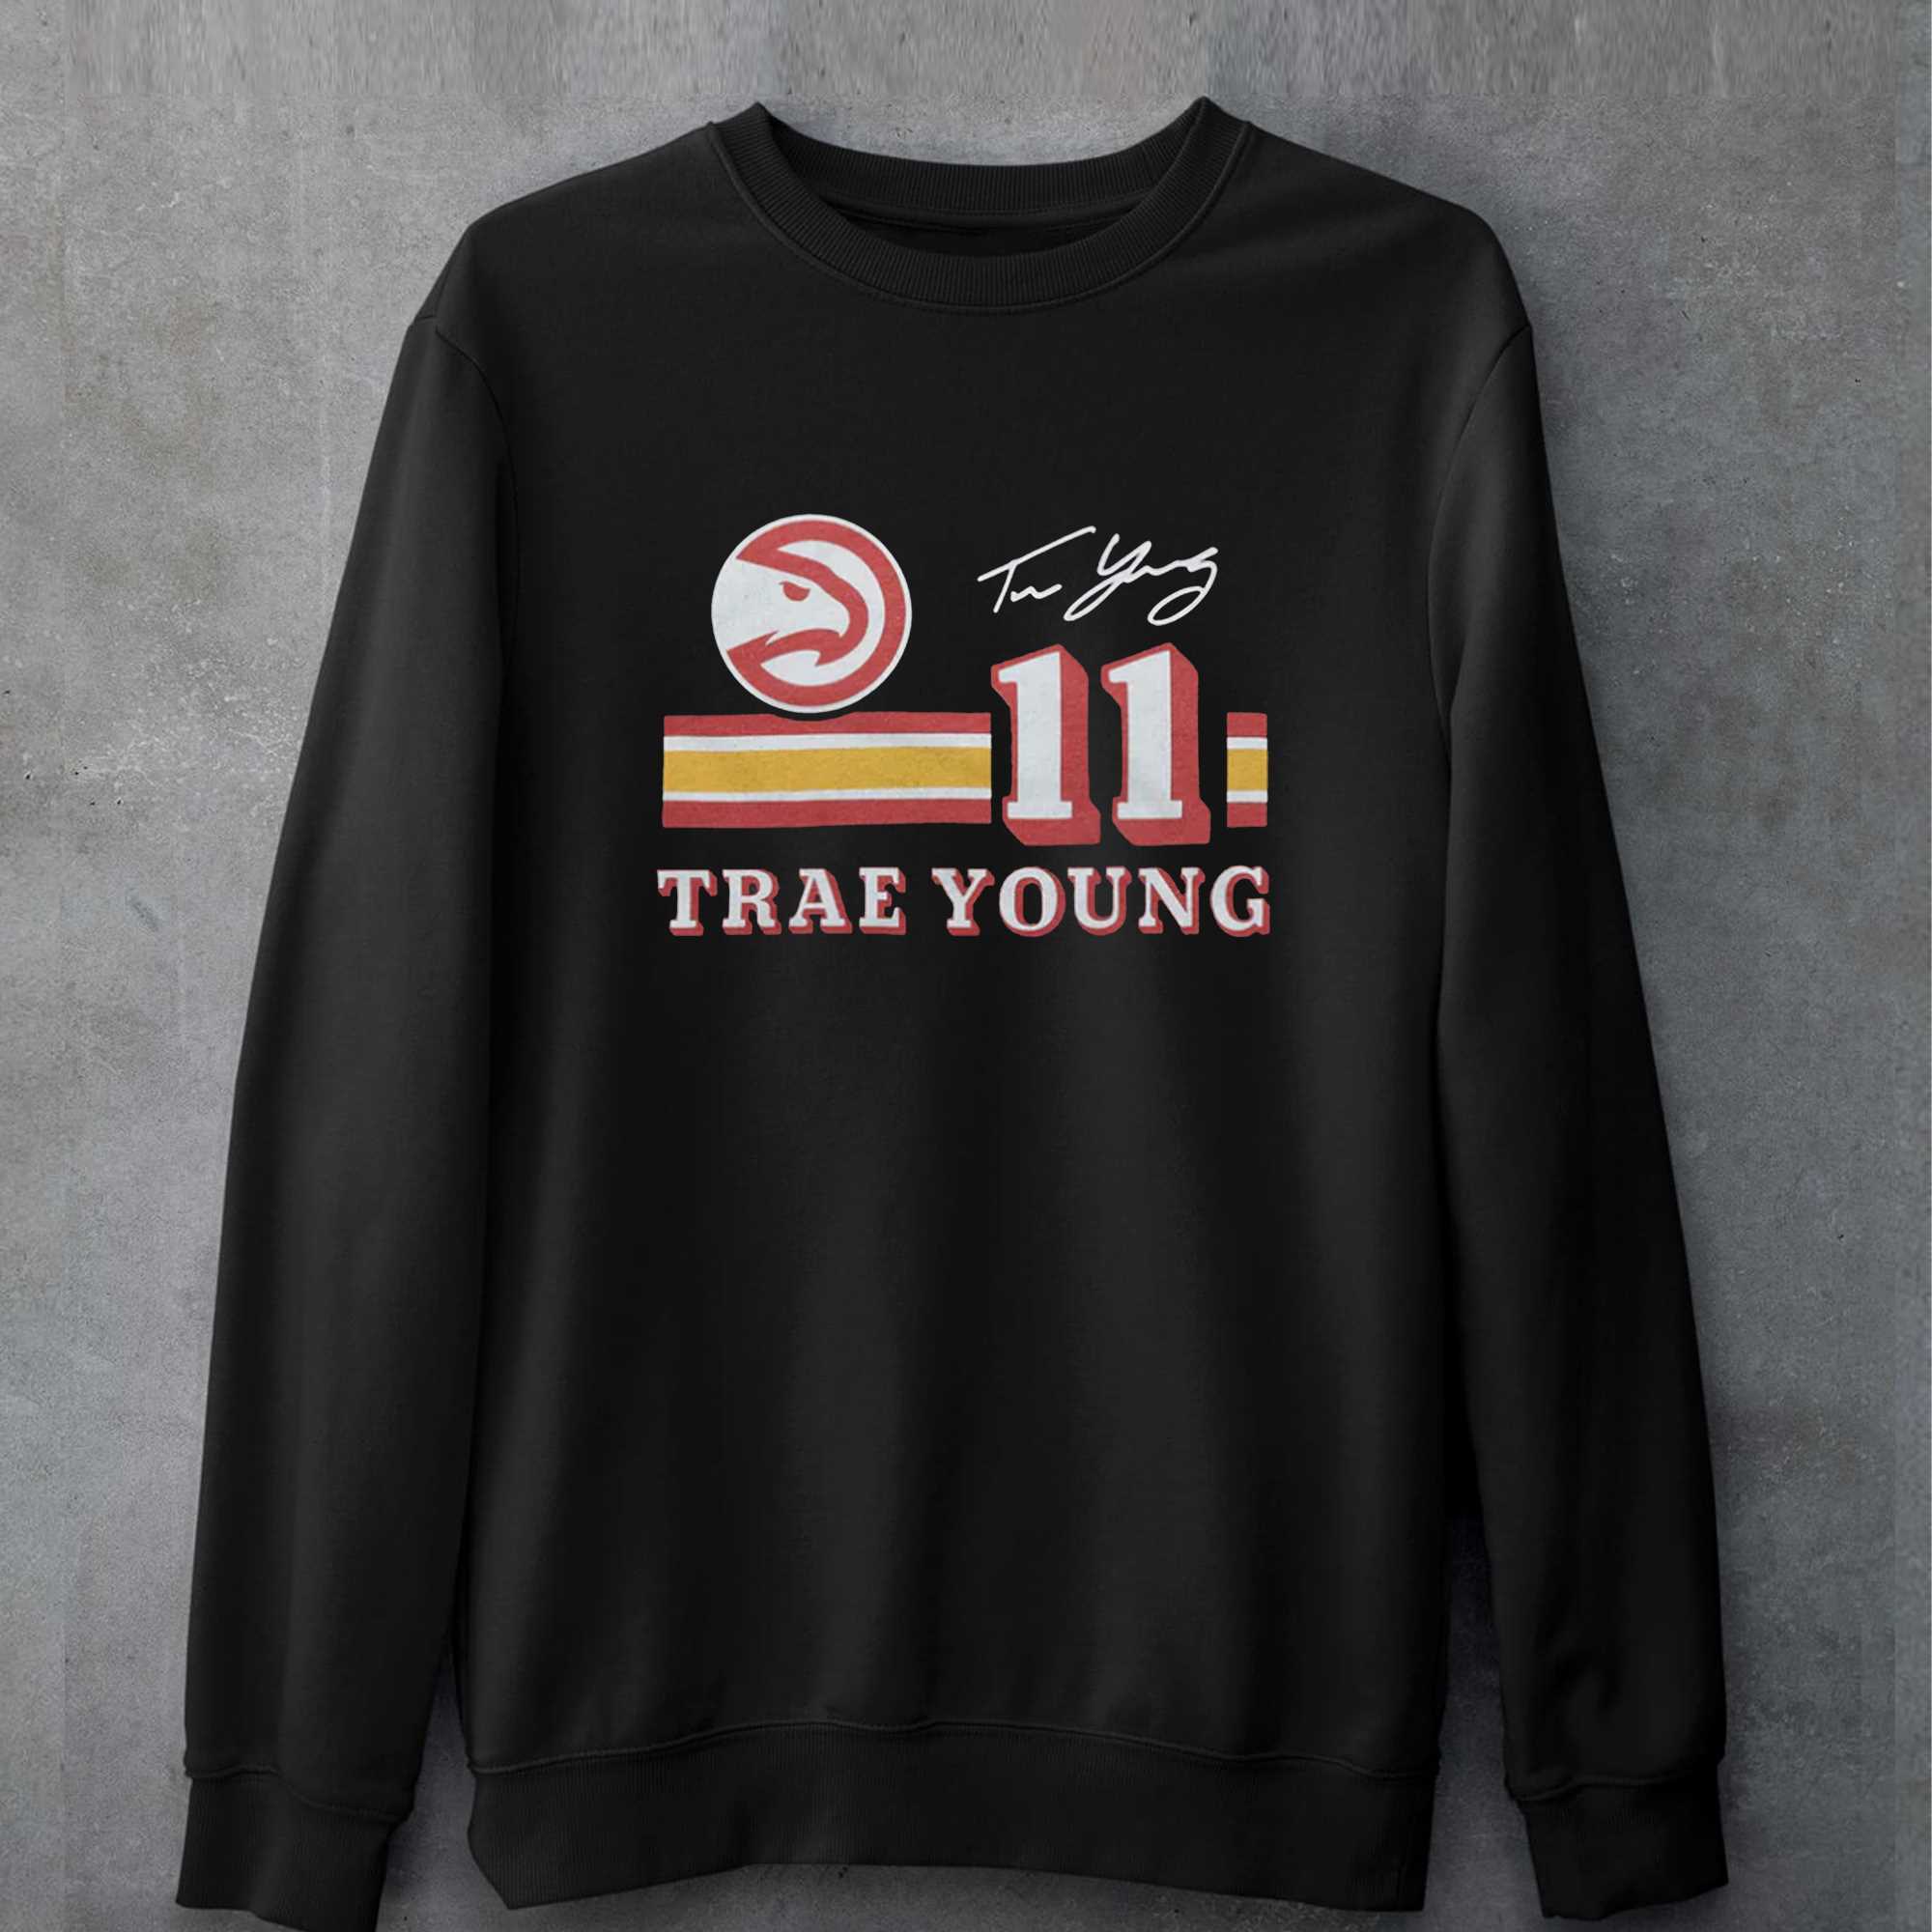 Trae Young Jerseys, Trae Young Shirt, Trae Young Gear & Merchandise